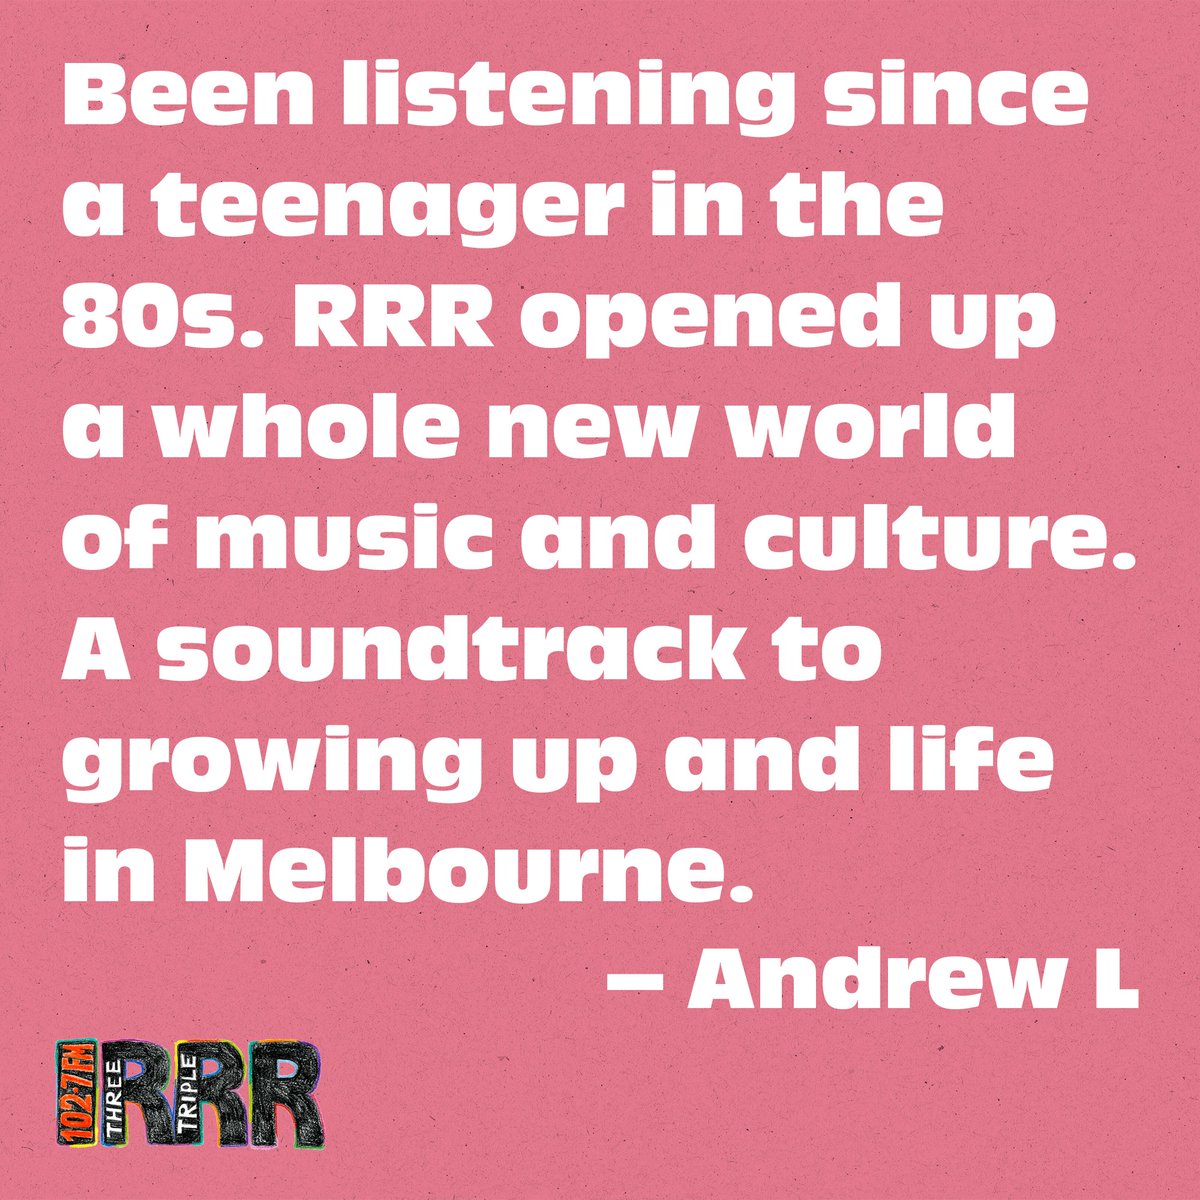 Why do you subscribe to Triple R? April Amnesty is on now – subscribe and donate at rrr.org.au!